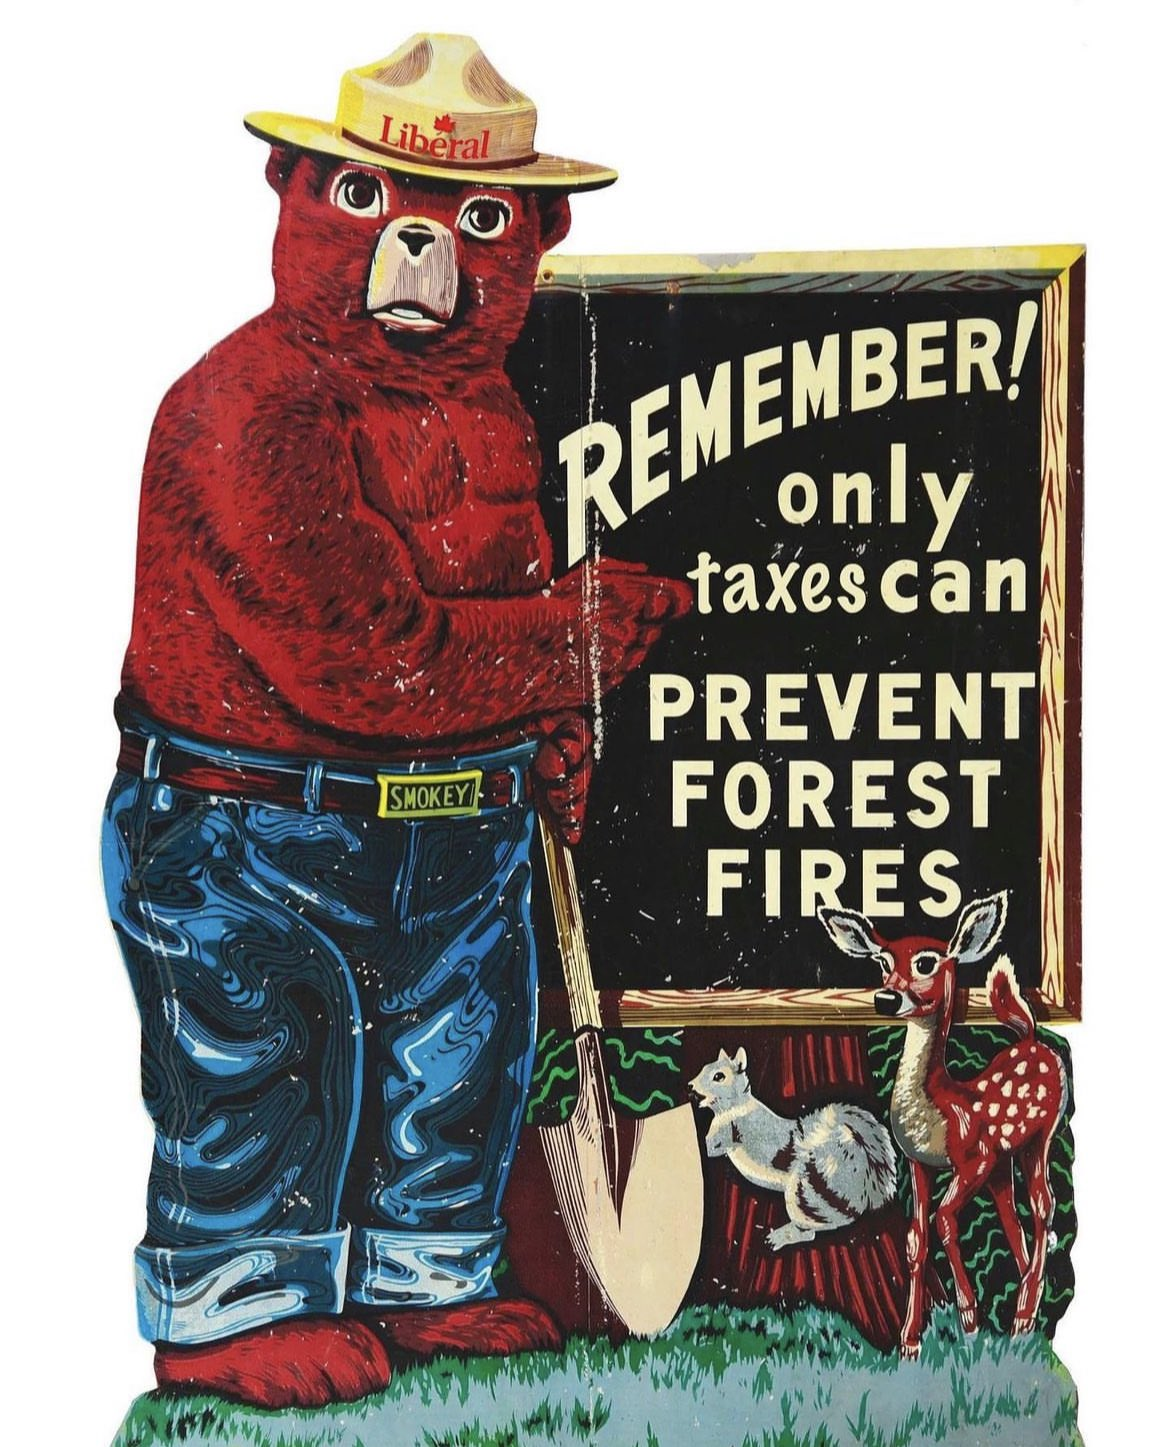 Remake of Smokey the bear poster that now says "Remember onoy taxes can prevent forest fires."